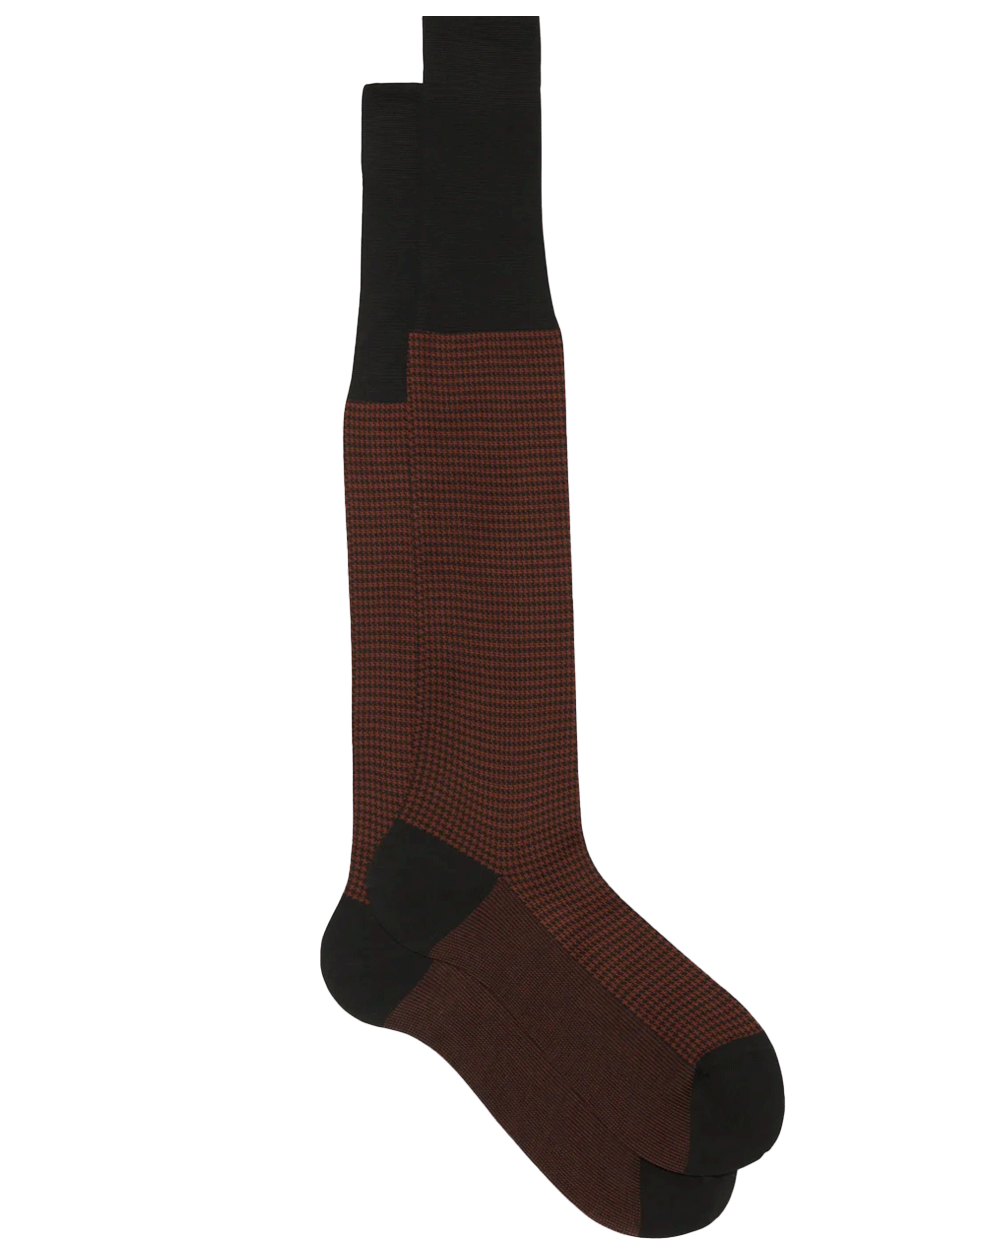 Houndstooth Over the Calf Socks in Brown